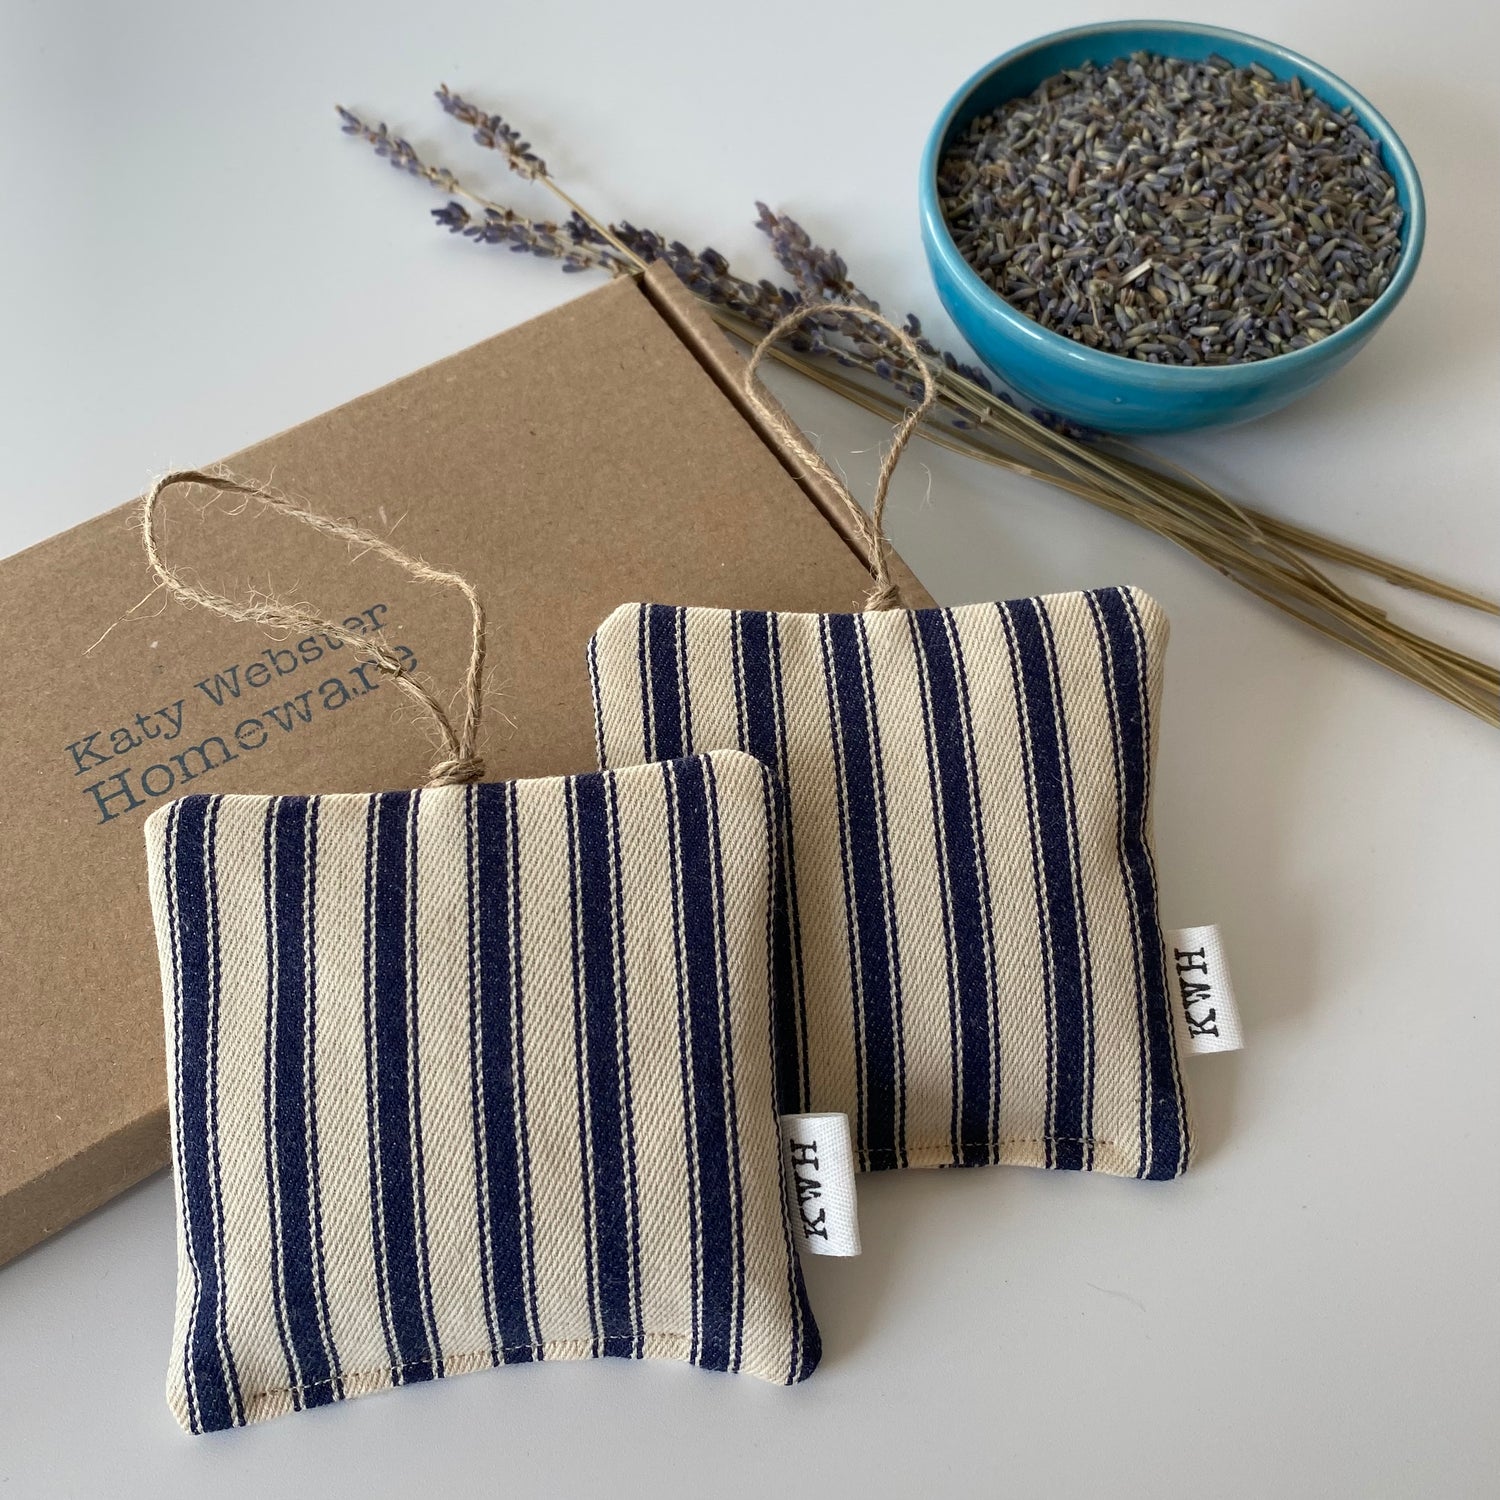 Cotton Lavender Bags in a gift box